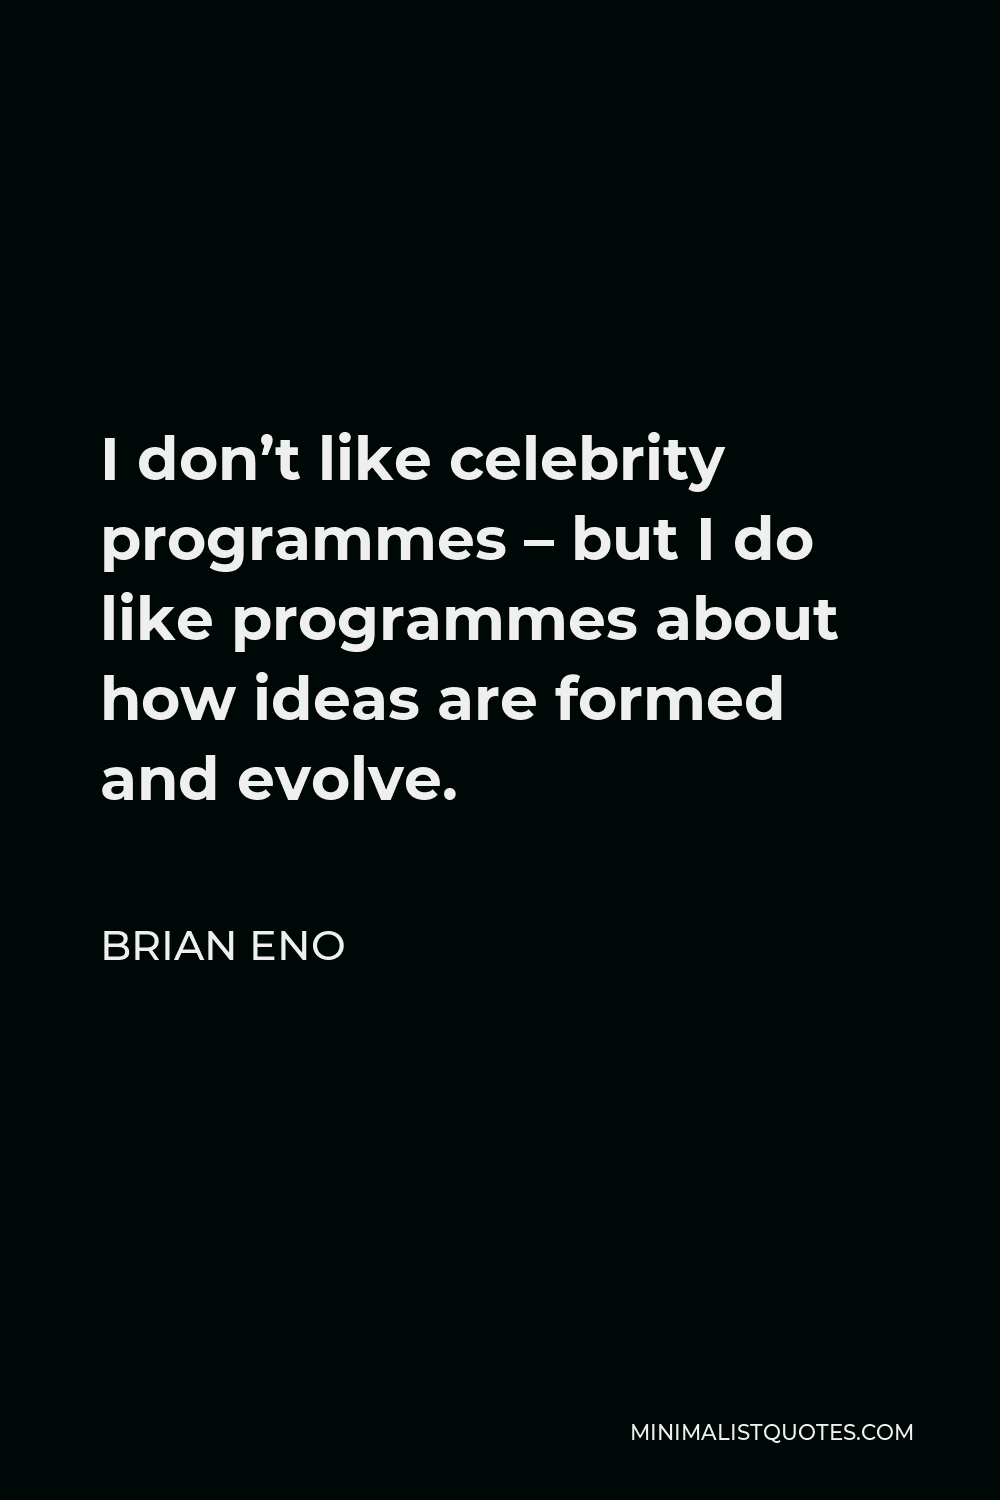 Brian Eno Quote - I don’t like celebrity programmes – but I do like programmes about how ideas are formed and evolve.